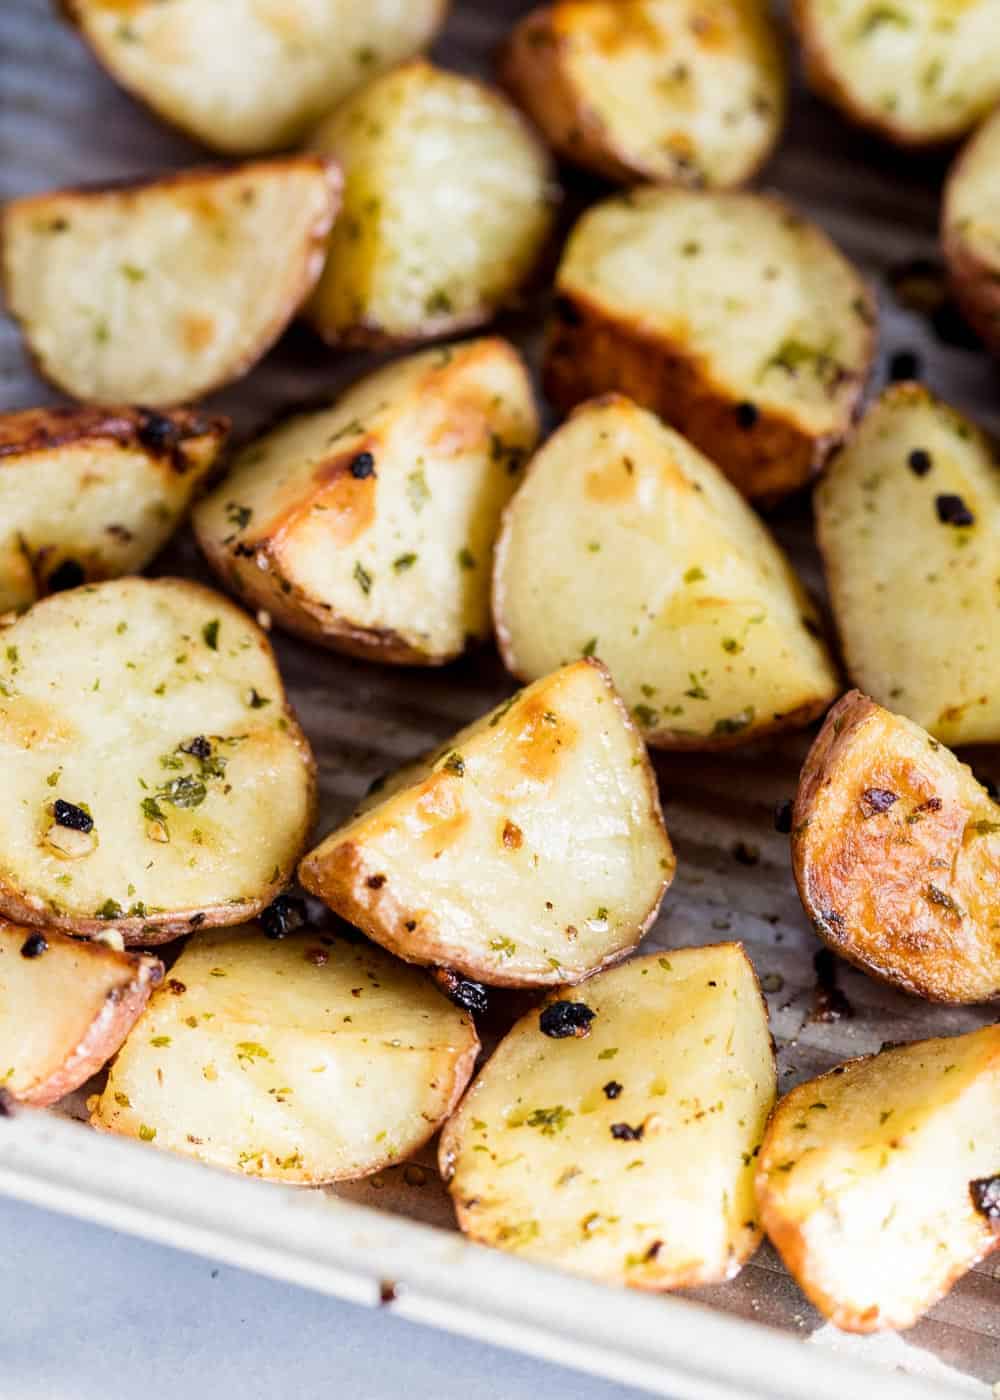 Oven roasted red potatoes in pan.